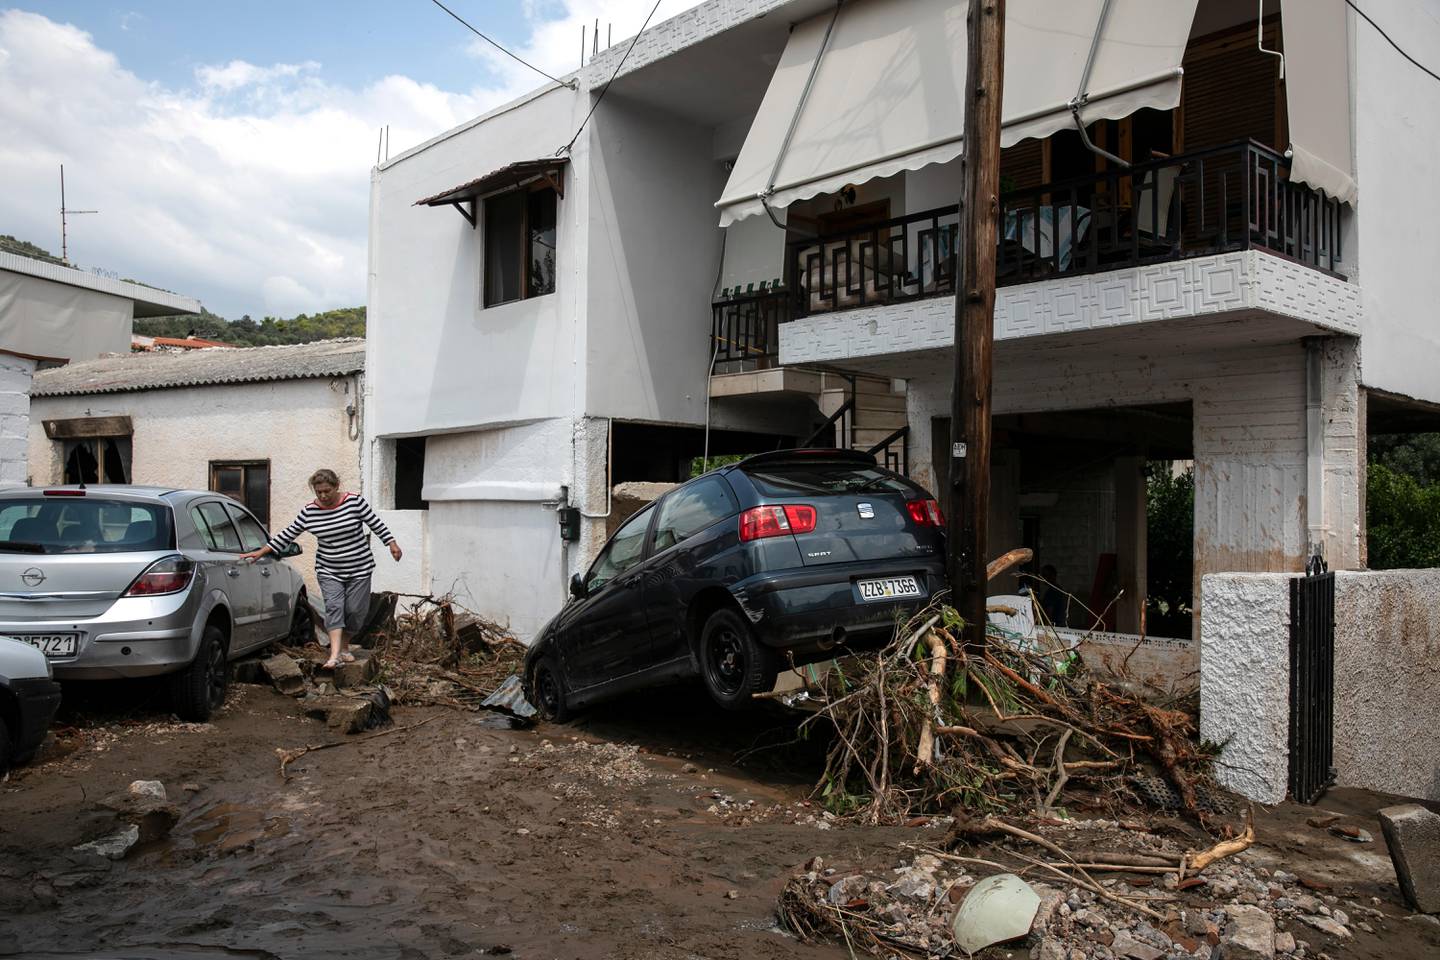 A woman walks between destroyed cars following a storm at the village of Politika, on Evia island, northeast of Athens, on Sunday, Aug. 9, 2020. Five people have been found dead and dozens have been trapped in their homes and cars from a storm that has hit the island of Evia, in central Greece, police say. (AP Photo/Yorgos Karahalis)